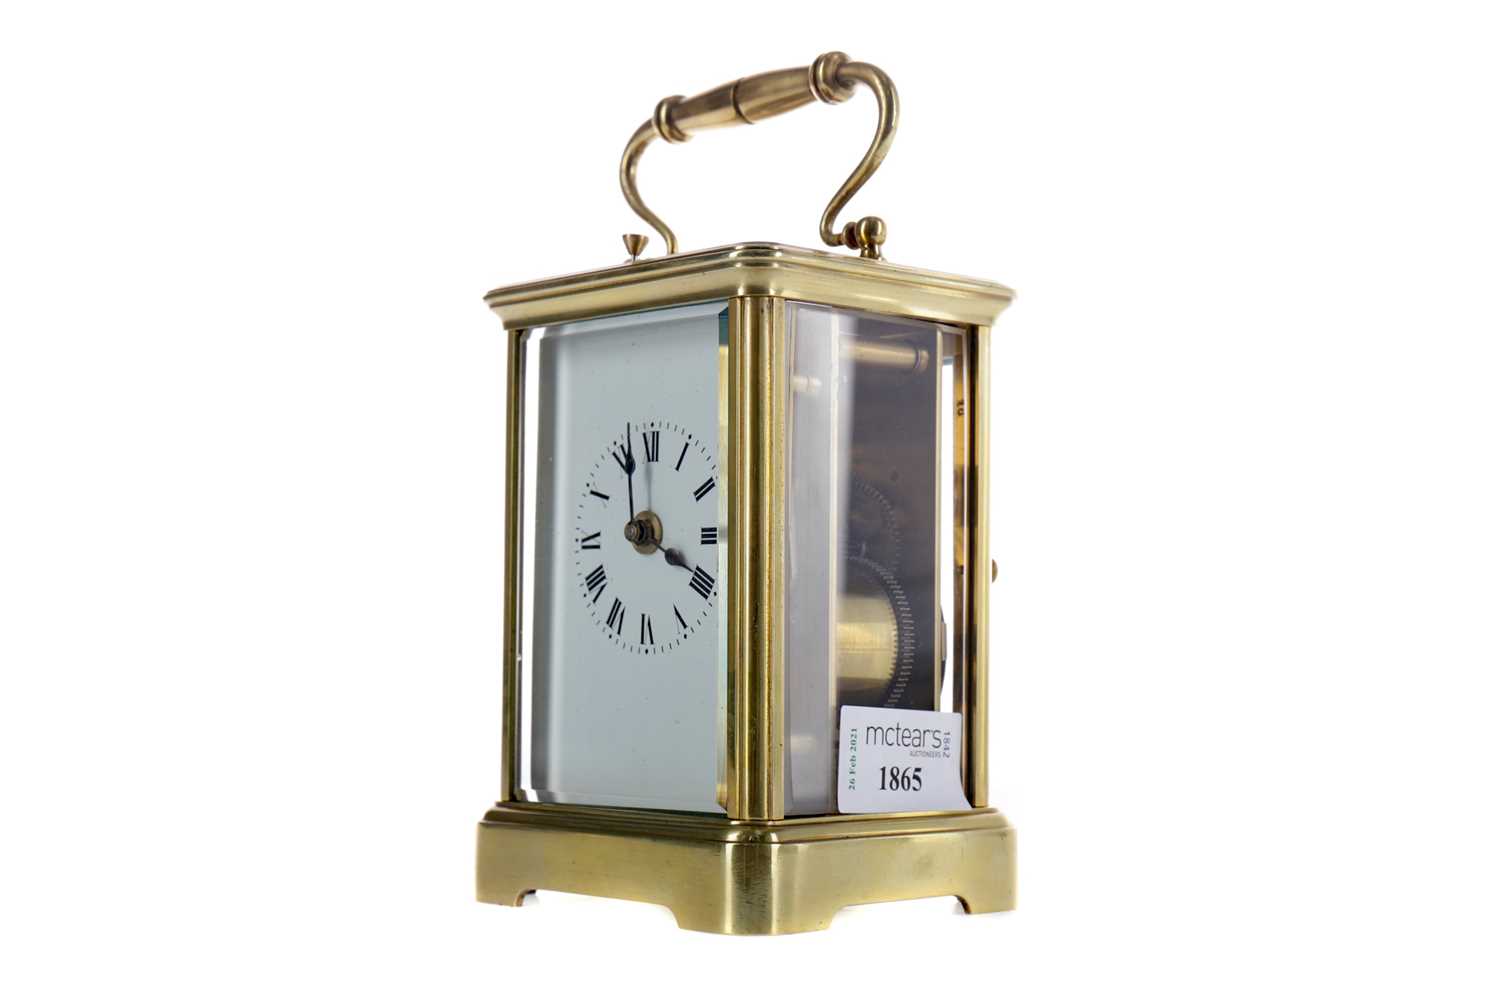 Lot 1865 - AN EARLY 20TH CENTURY REPEATER CARRIAGE CLOCK